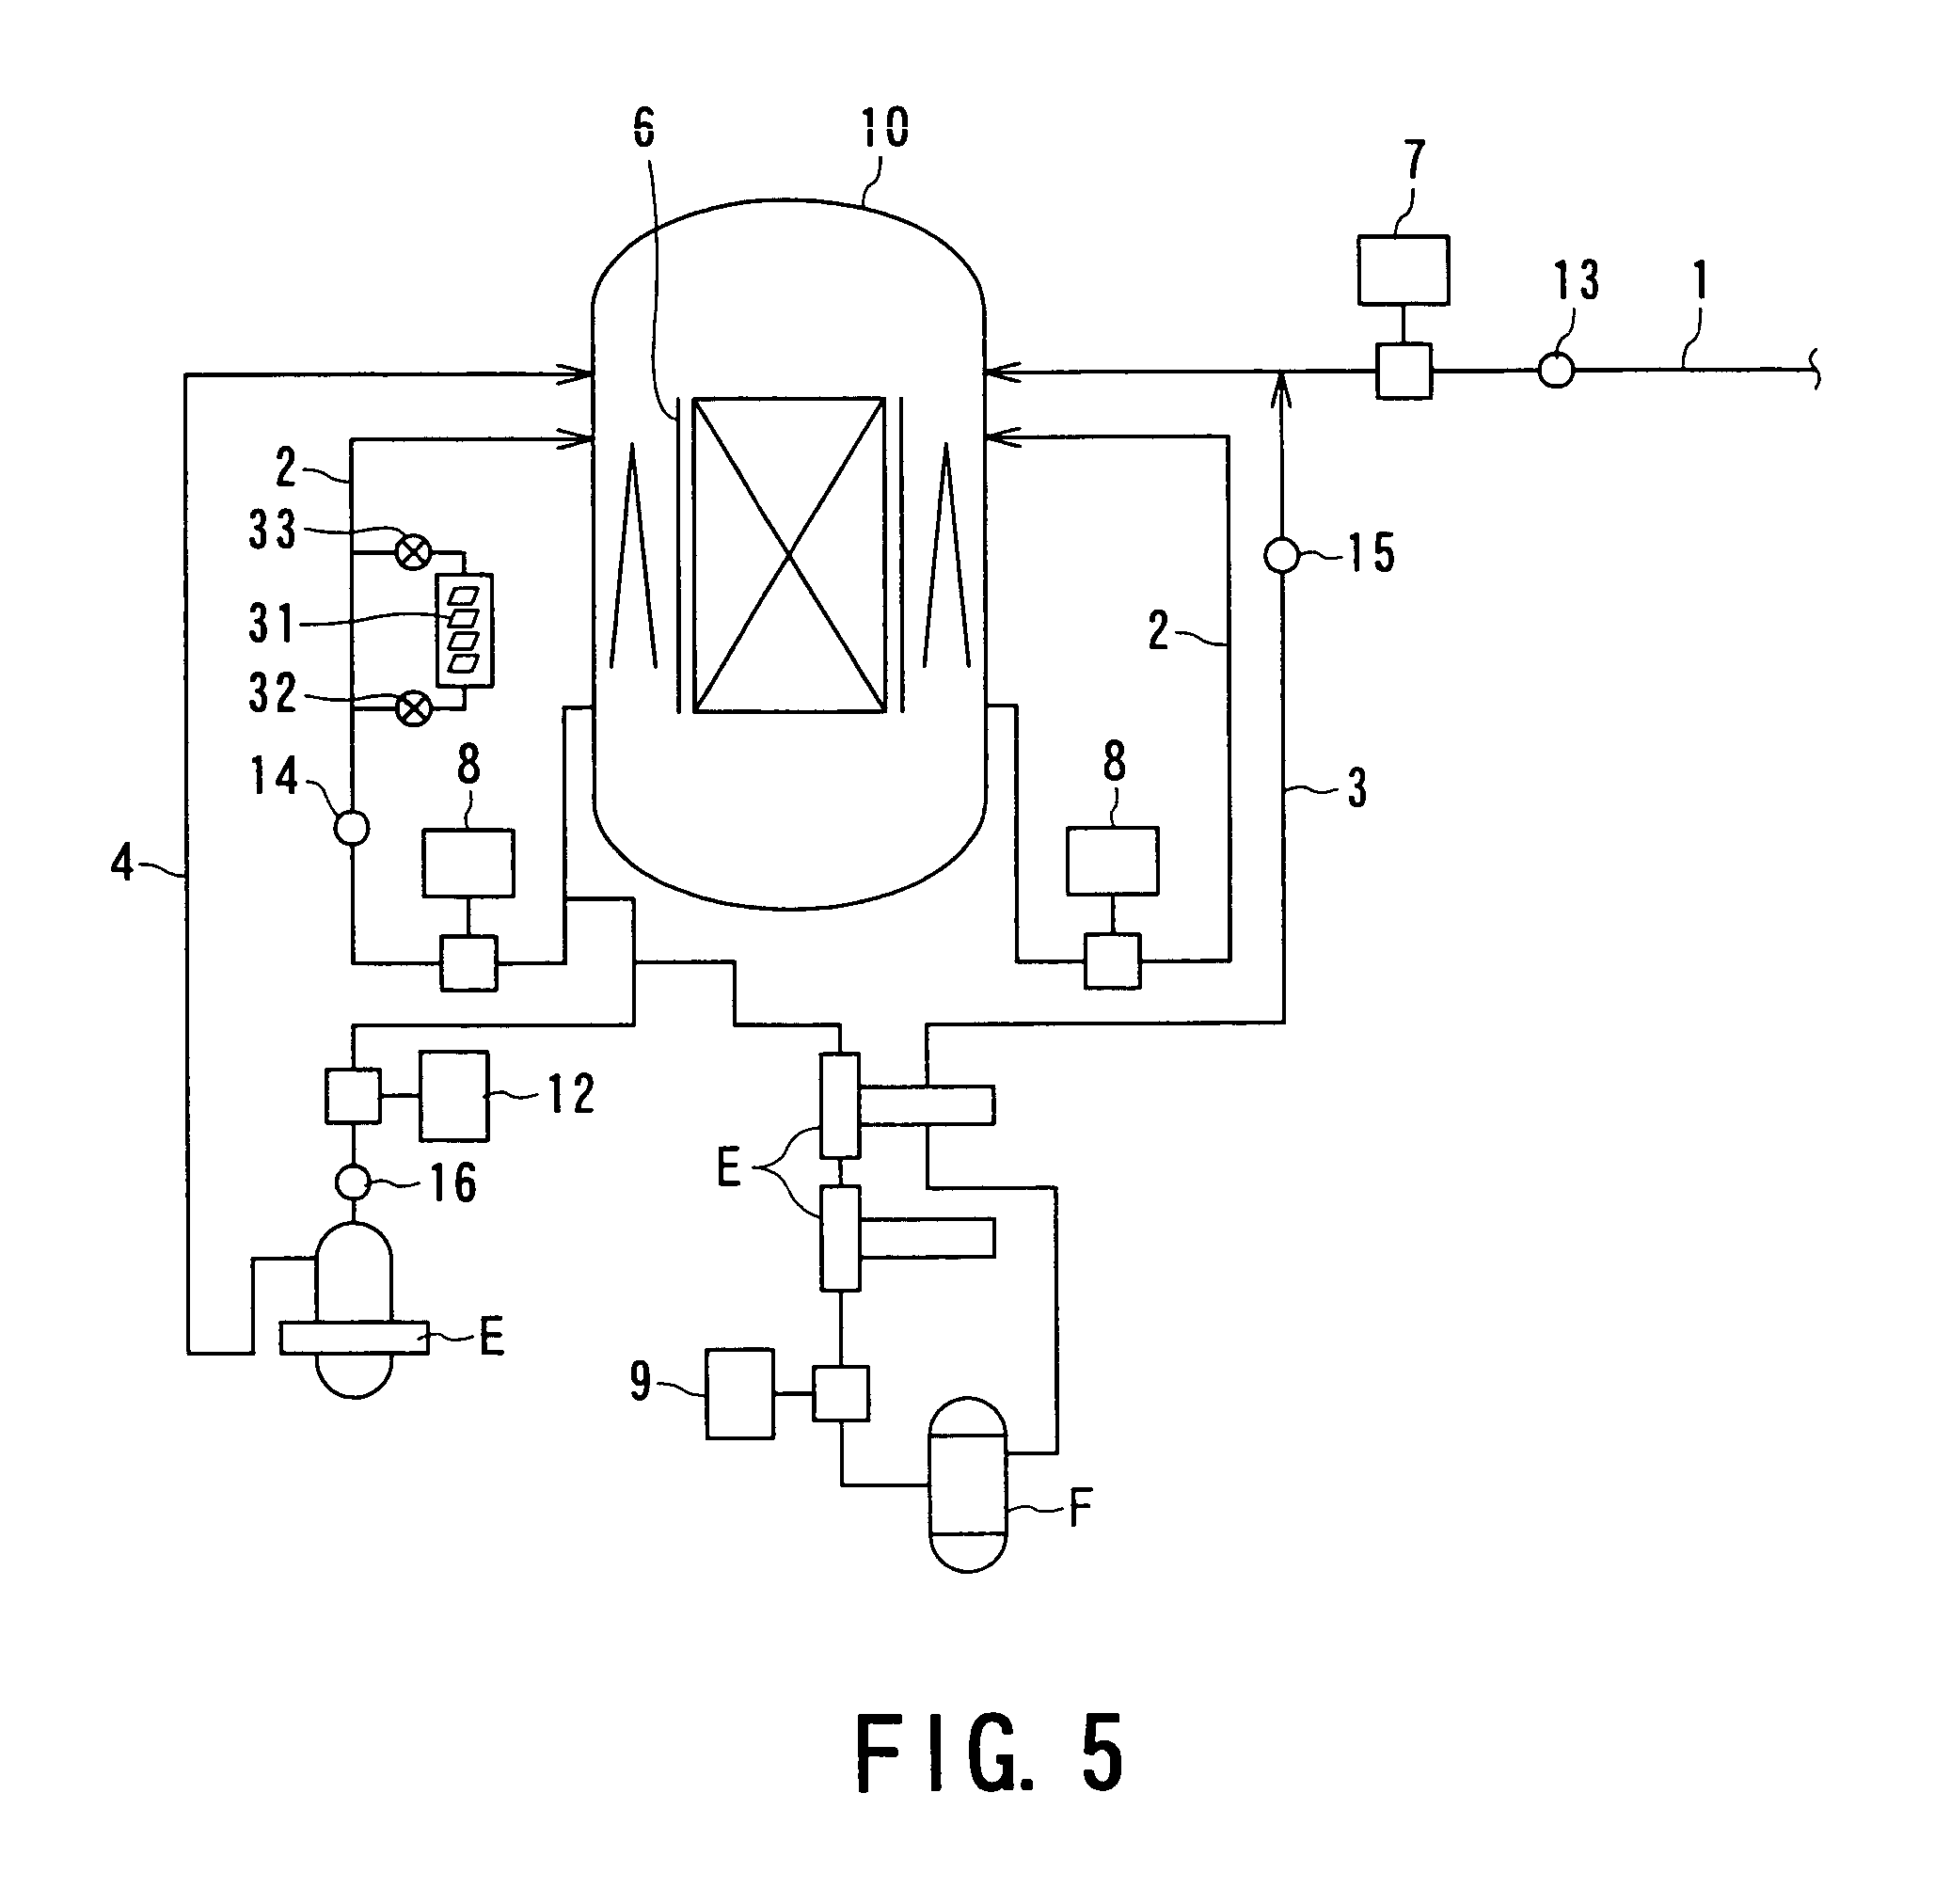 Method of reducing corrosion of nuclear reactor structural material